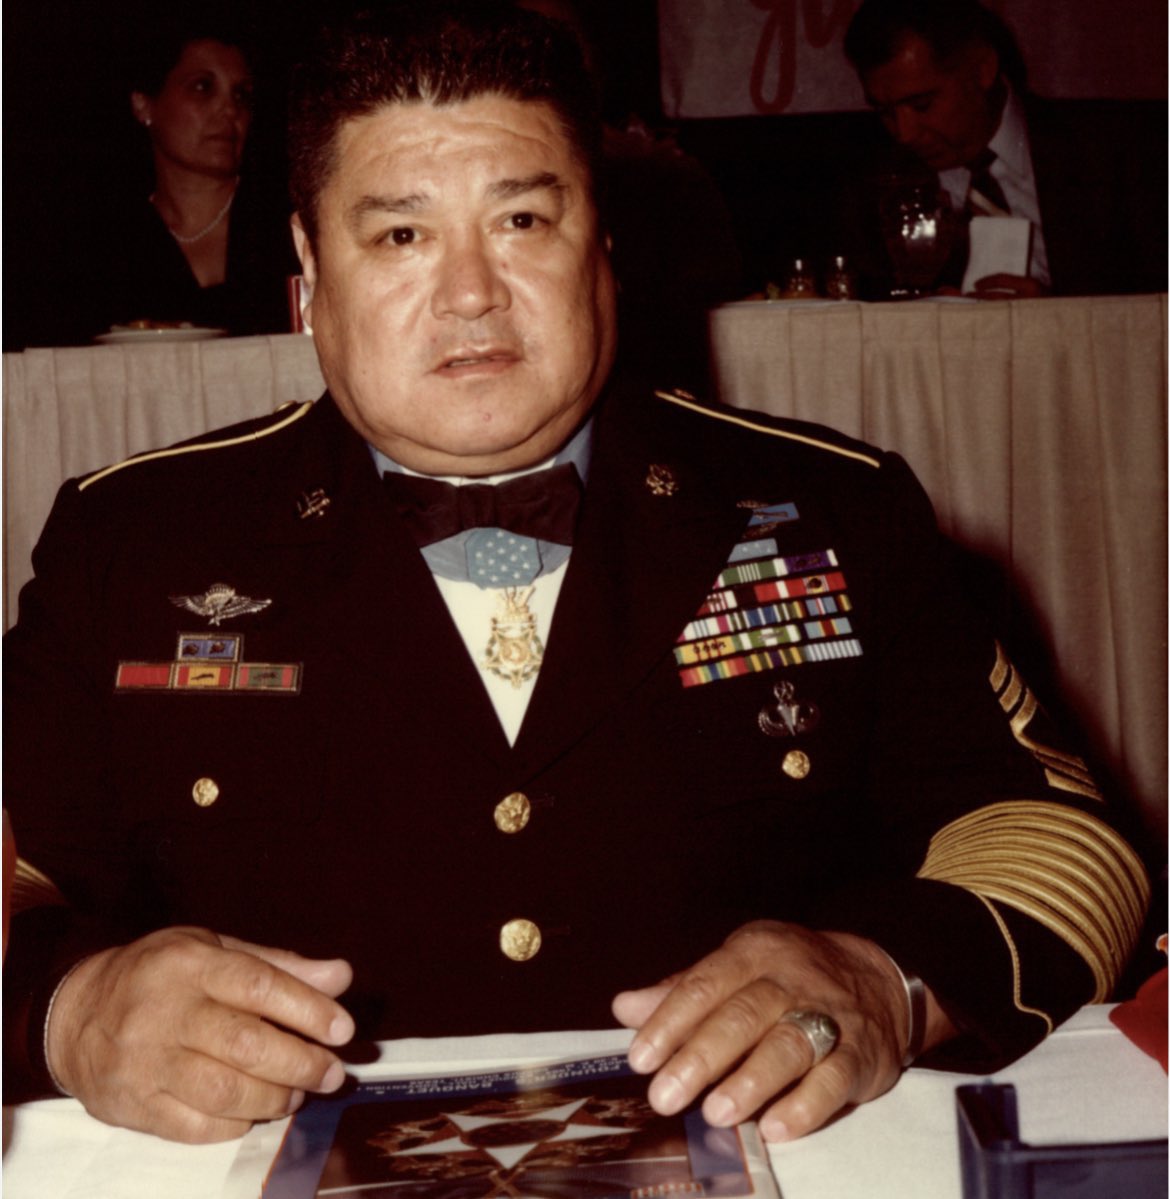 @Morbidful Did he got all of this during the war 😳😳 The Medal of Honor recipient, Master Sergeant Roy Benavidez had 37 puncture wounds, exposed intestine, broken jaw, and eyes caked in blood. He appeared to be dead until he spit in the face of a doctor who was zipping him up in a body